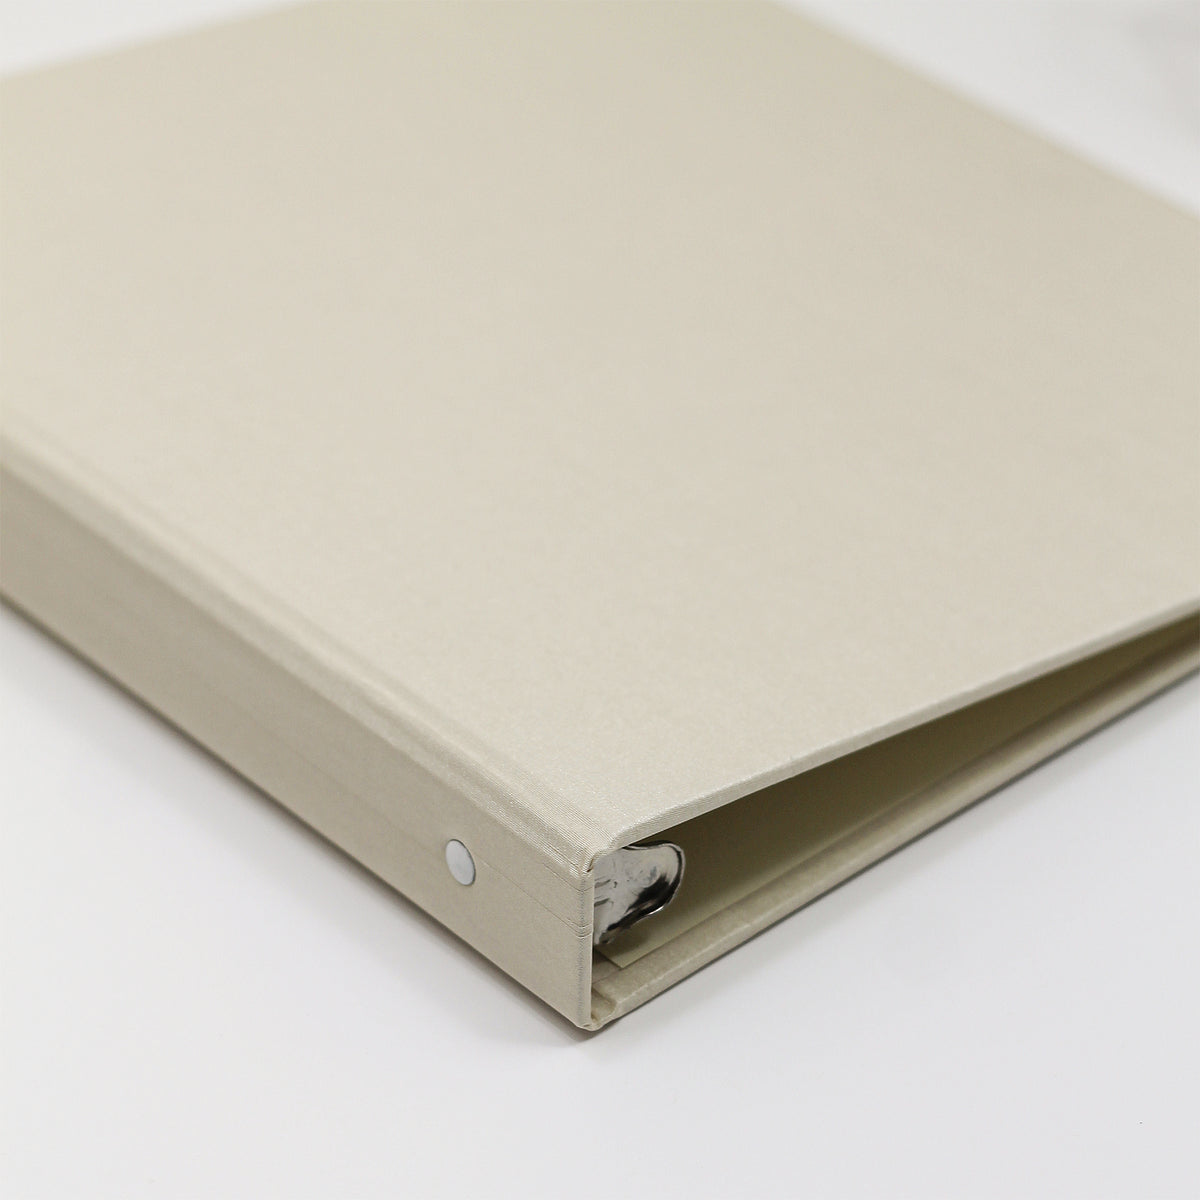 Holiday Card Album | Cover: Champagne Silk | Embossed with “Holiday Cards” | Available Personalized